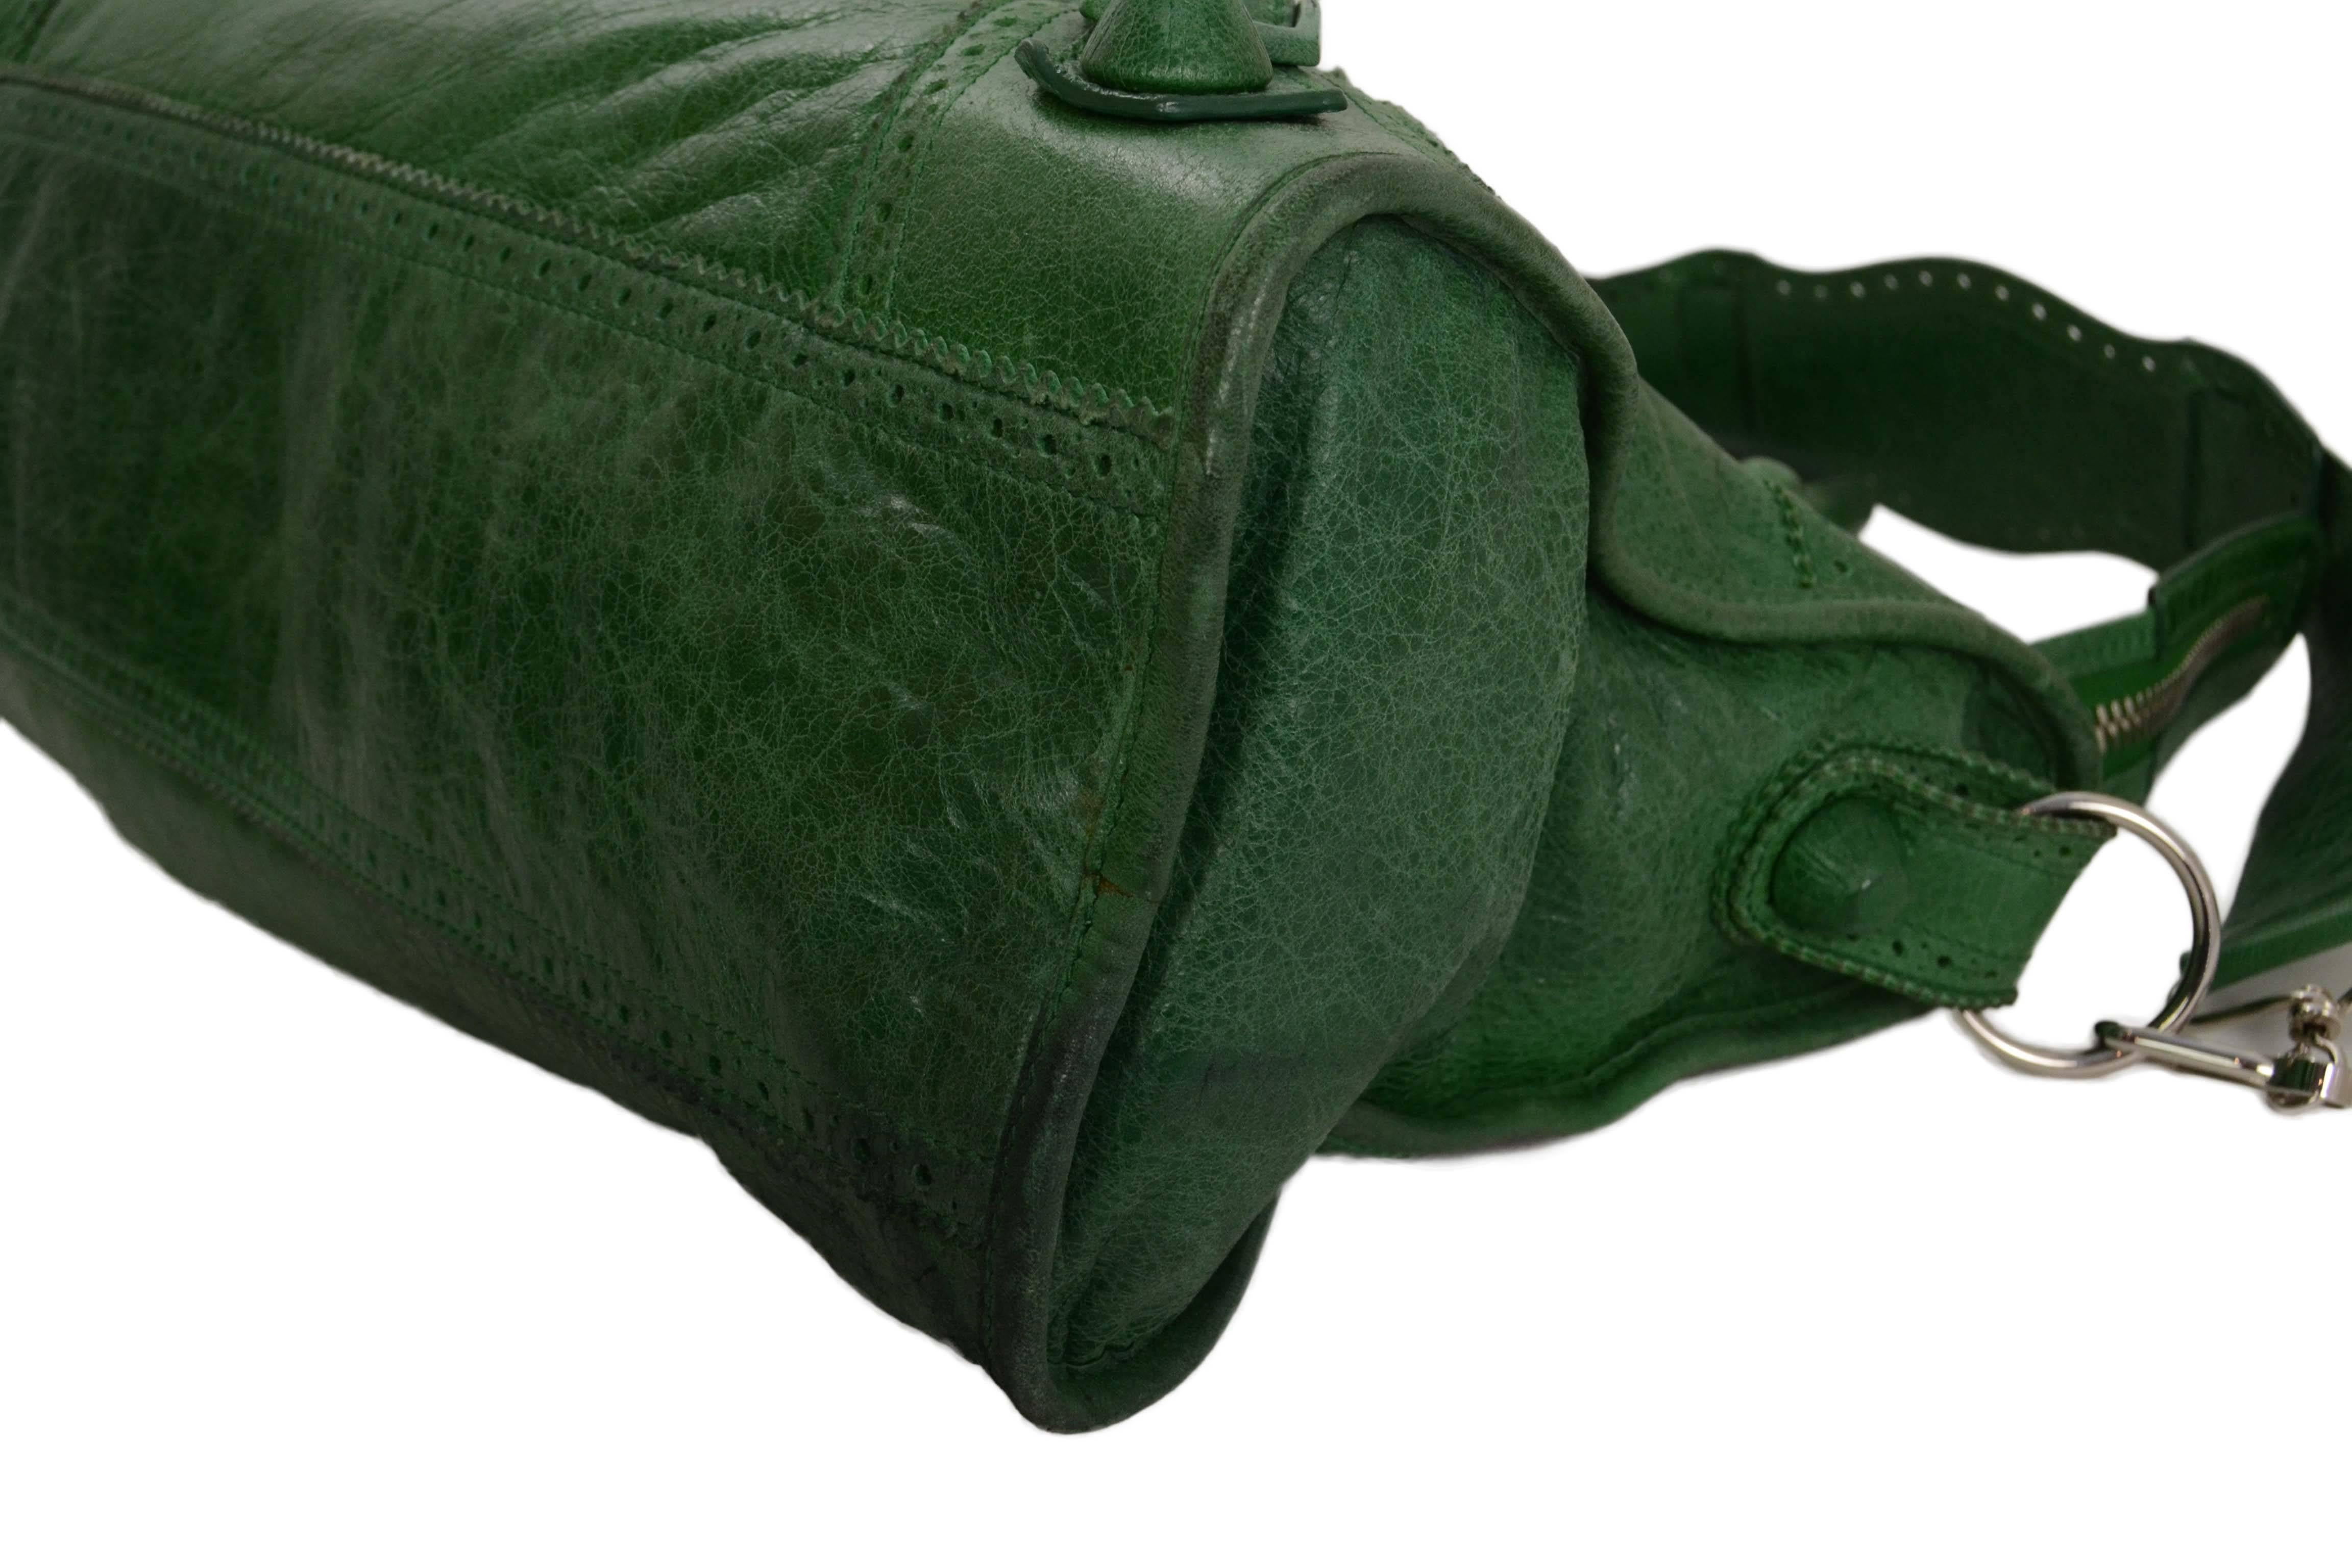 Black Balenciaga Green Leather Giant Brogues Covered Motorcycle City Bag rt. $2, 045